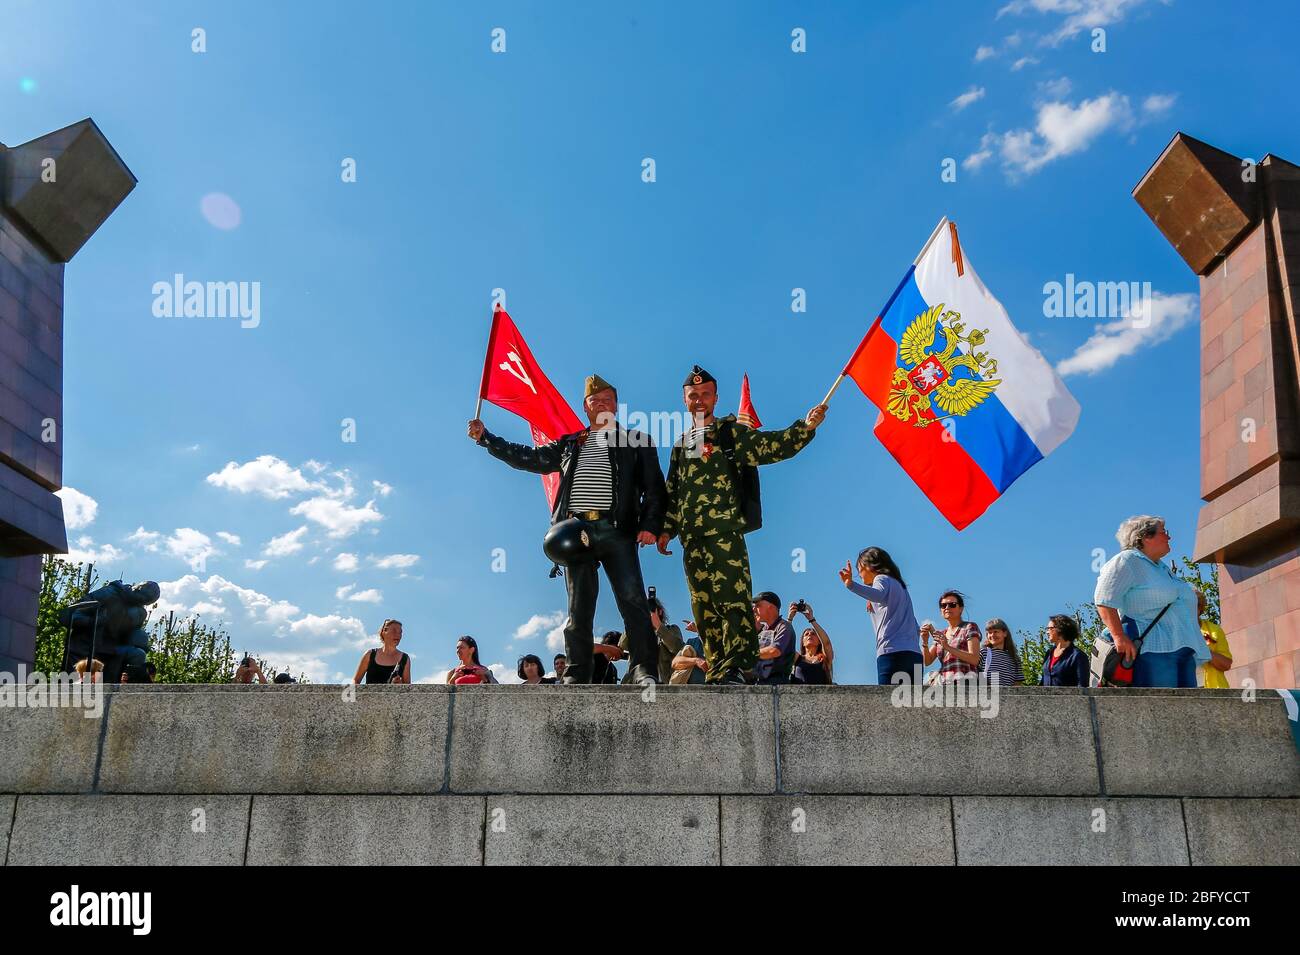 May 9, 2016, Berlin, at the Soviet War Memorial in Treptower Park (Treptower War Memorial), a memorial and at the same time a military cemetery, numerous Russians and German-Russians with many colorful flags commemorate the 71st day of victory at the end of the Second World War. The memorial was erected in Germany in 1949 on the instructions of the Soviet military administration to honor the soldiers of the Red Army who died in World War II. Over 7000 of the soldiers who died in the Schlaughs around Berlin are buried here. Men, some in uniform, pose with the Russian and Soviet national flags. Stock Photo